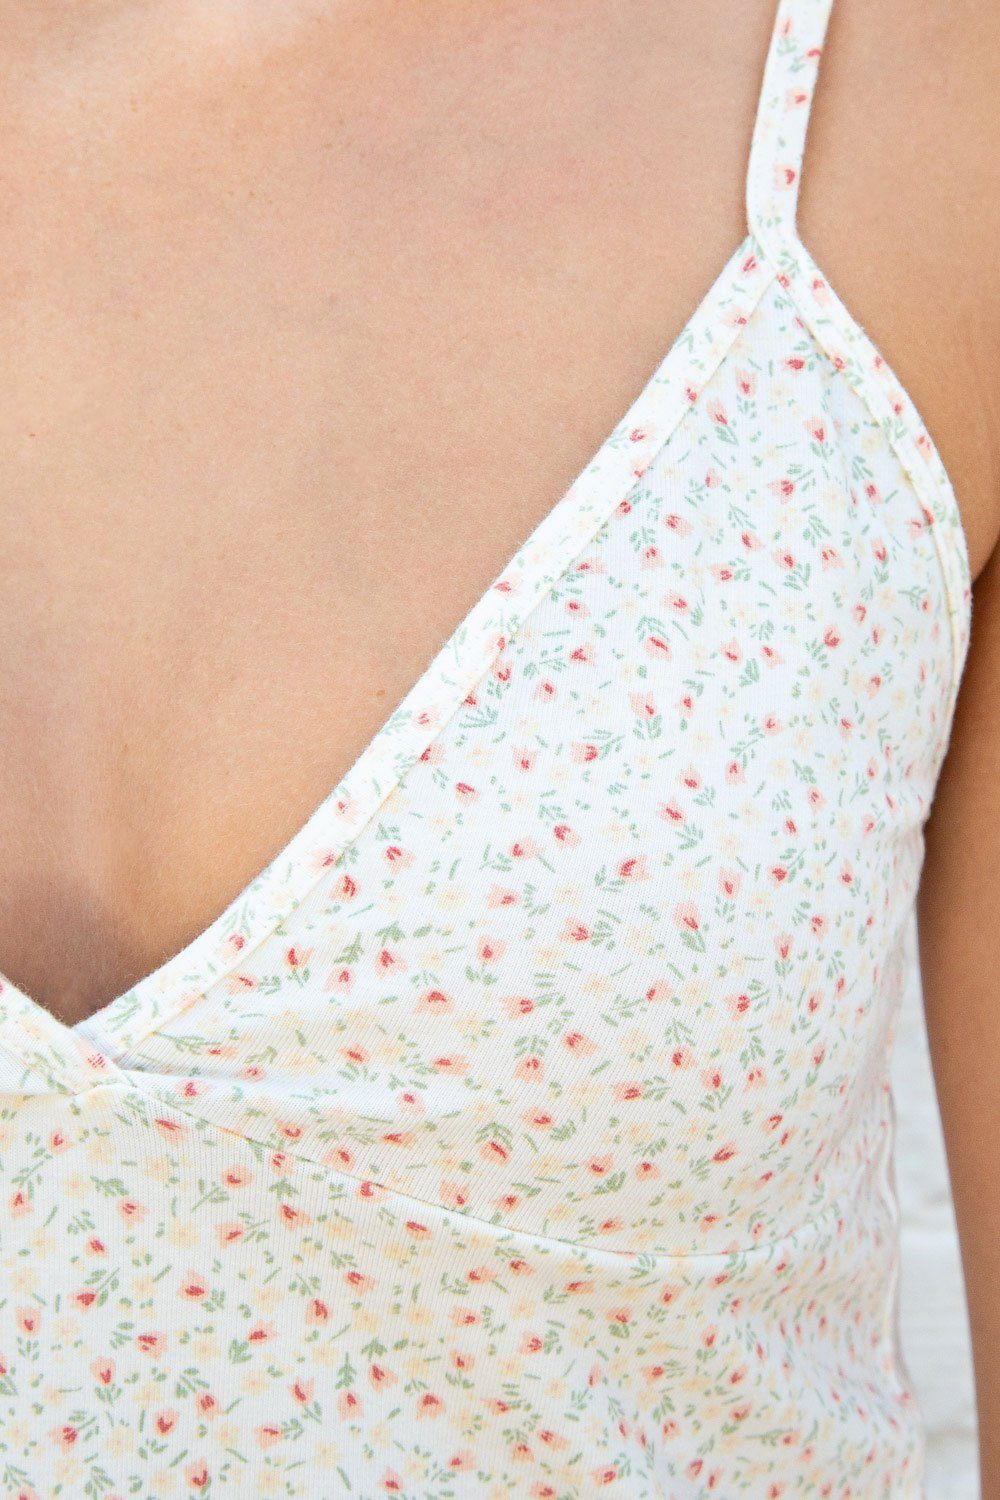 Brandy Melville Floral Tank Multi - $14 (12% Off Retail) - From Lily